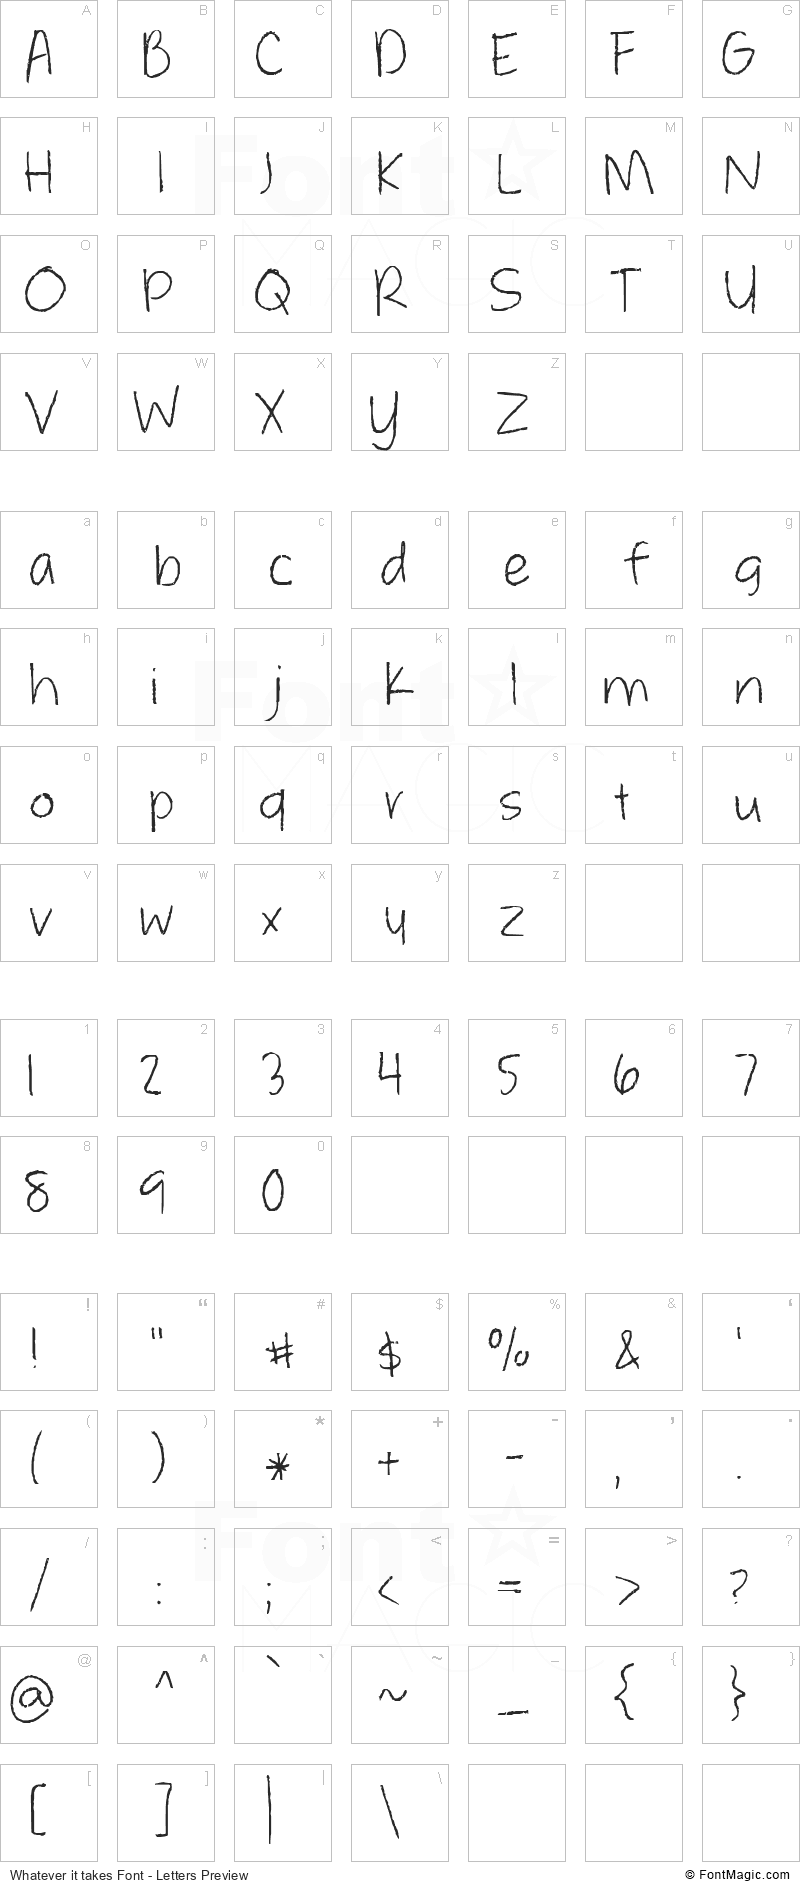 Whatever it takes Font - All Latters Preview Chart